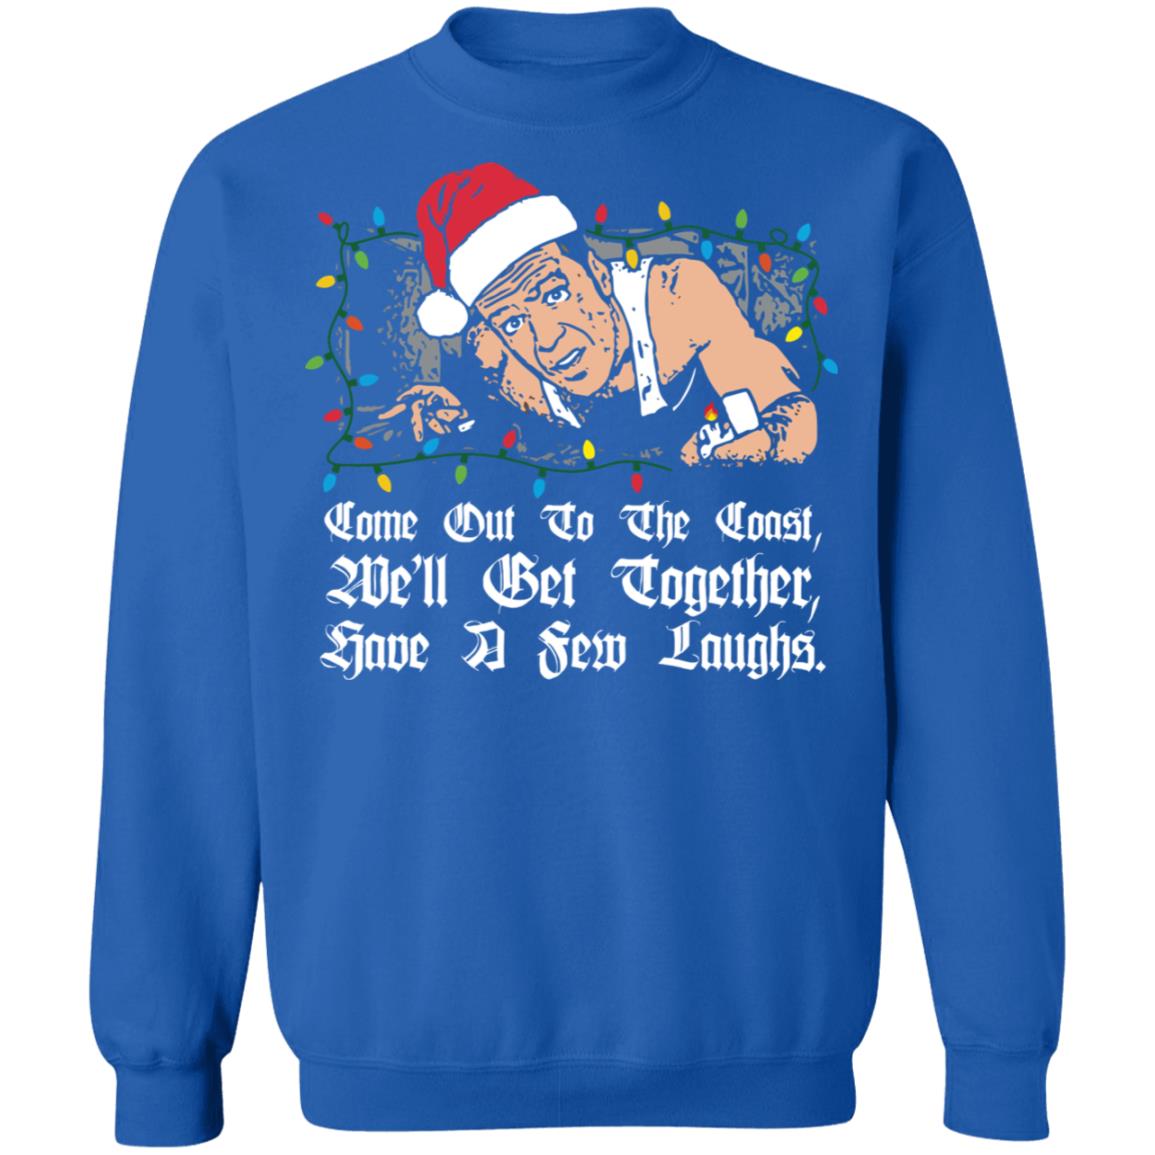 John Mcclane come out to the coast we’ll get together Christmas sweater ...